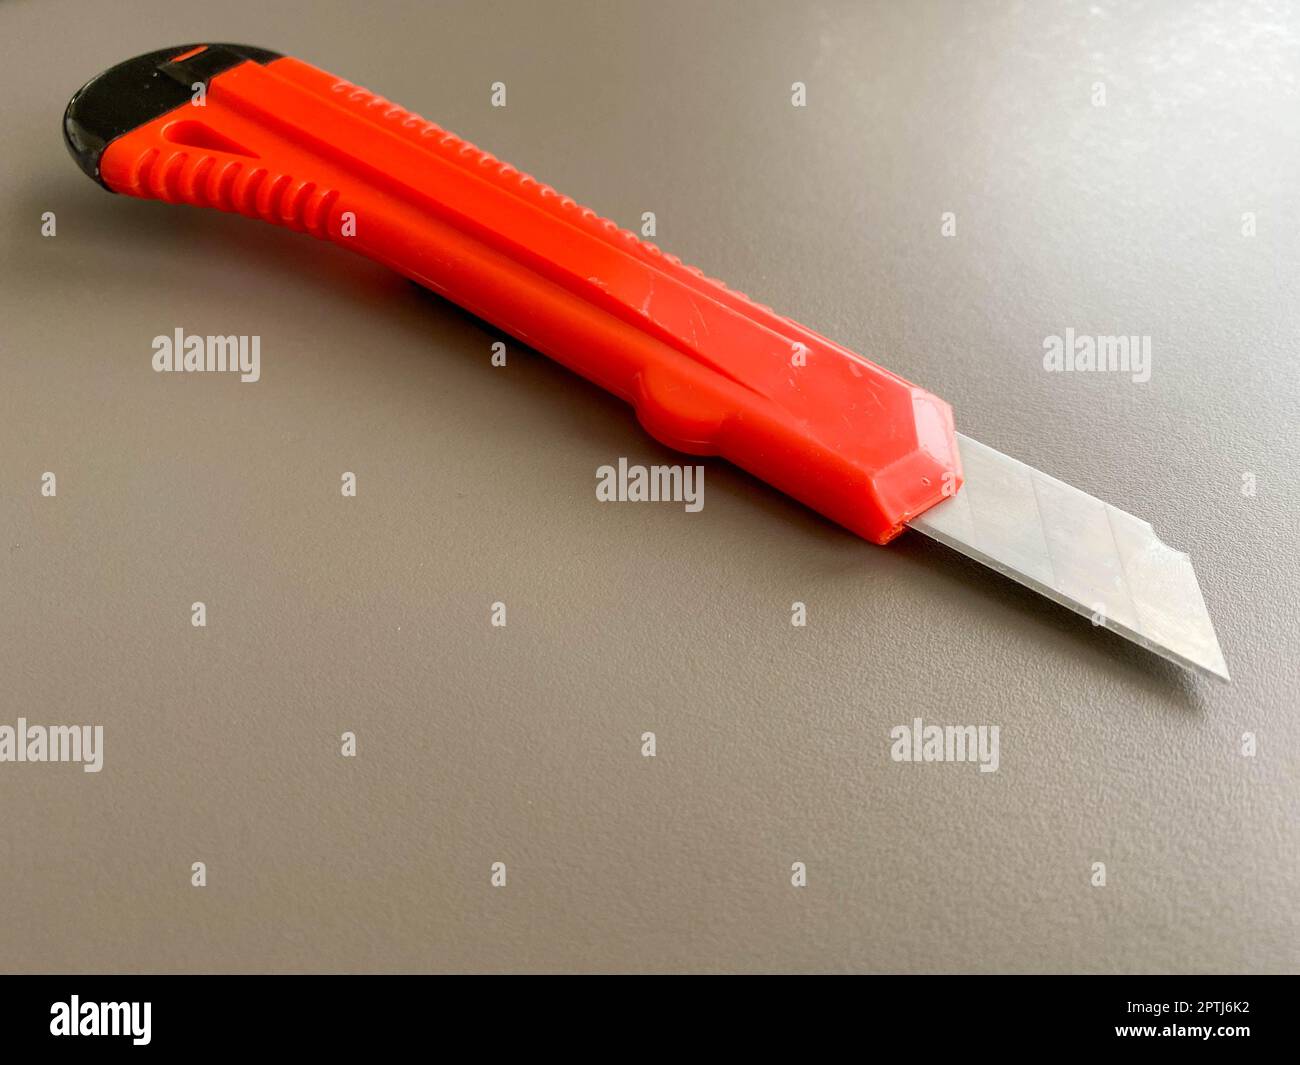 A Red Knife With The Blade Protected By A Plastic Cover Stock Photo,  Picture and Royalty Free Image. Image 102869035.